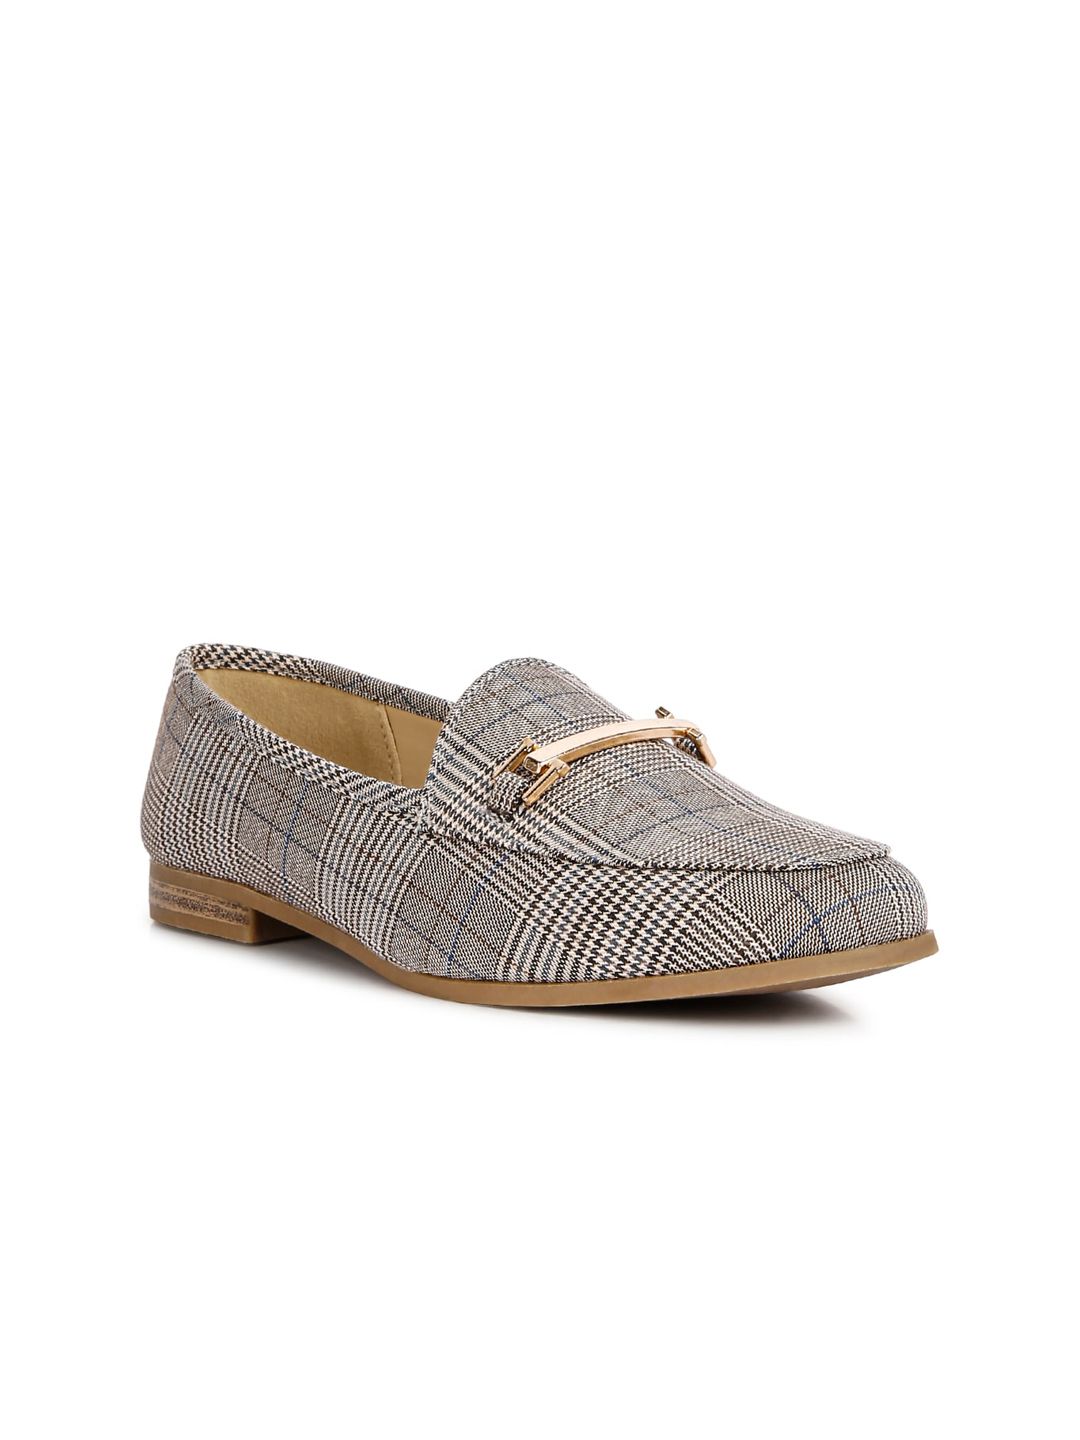 London Rag Women Grey Woven Design Loafers Price in India